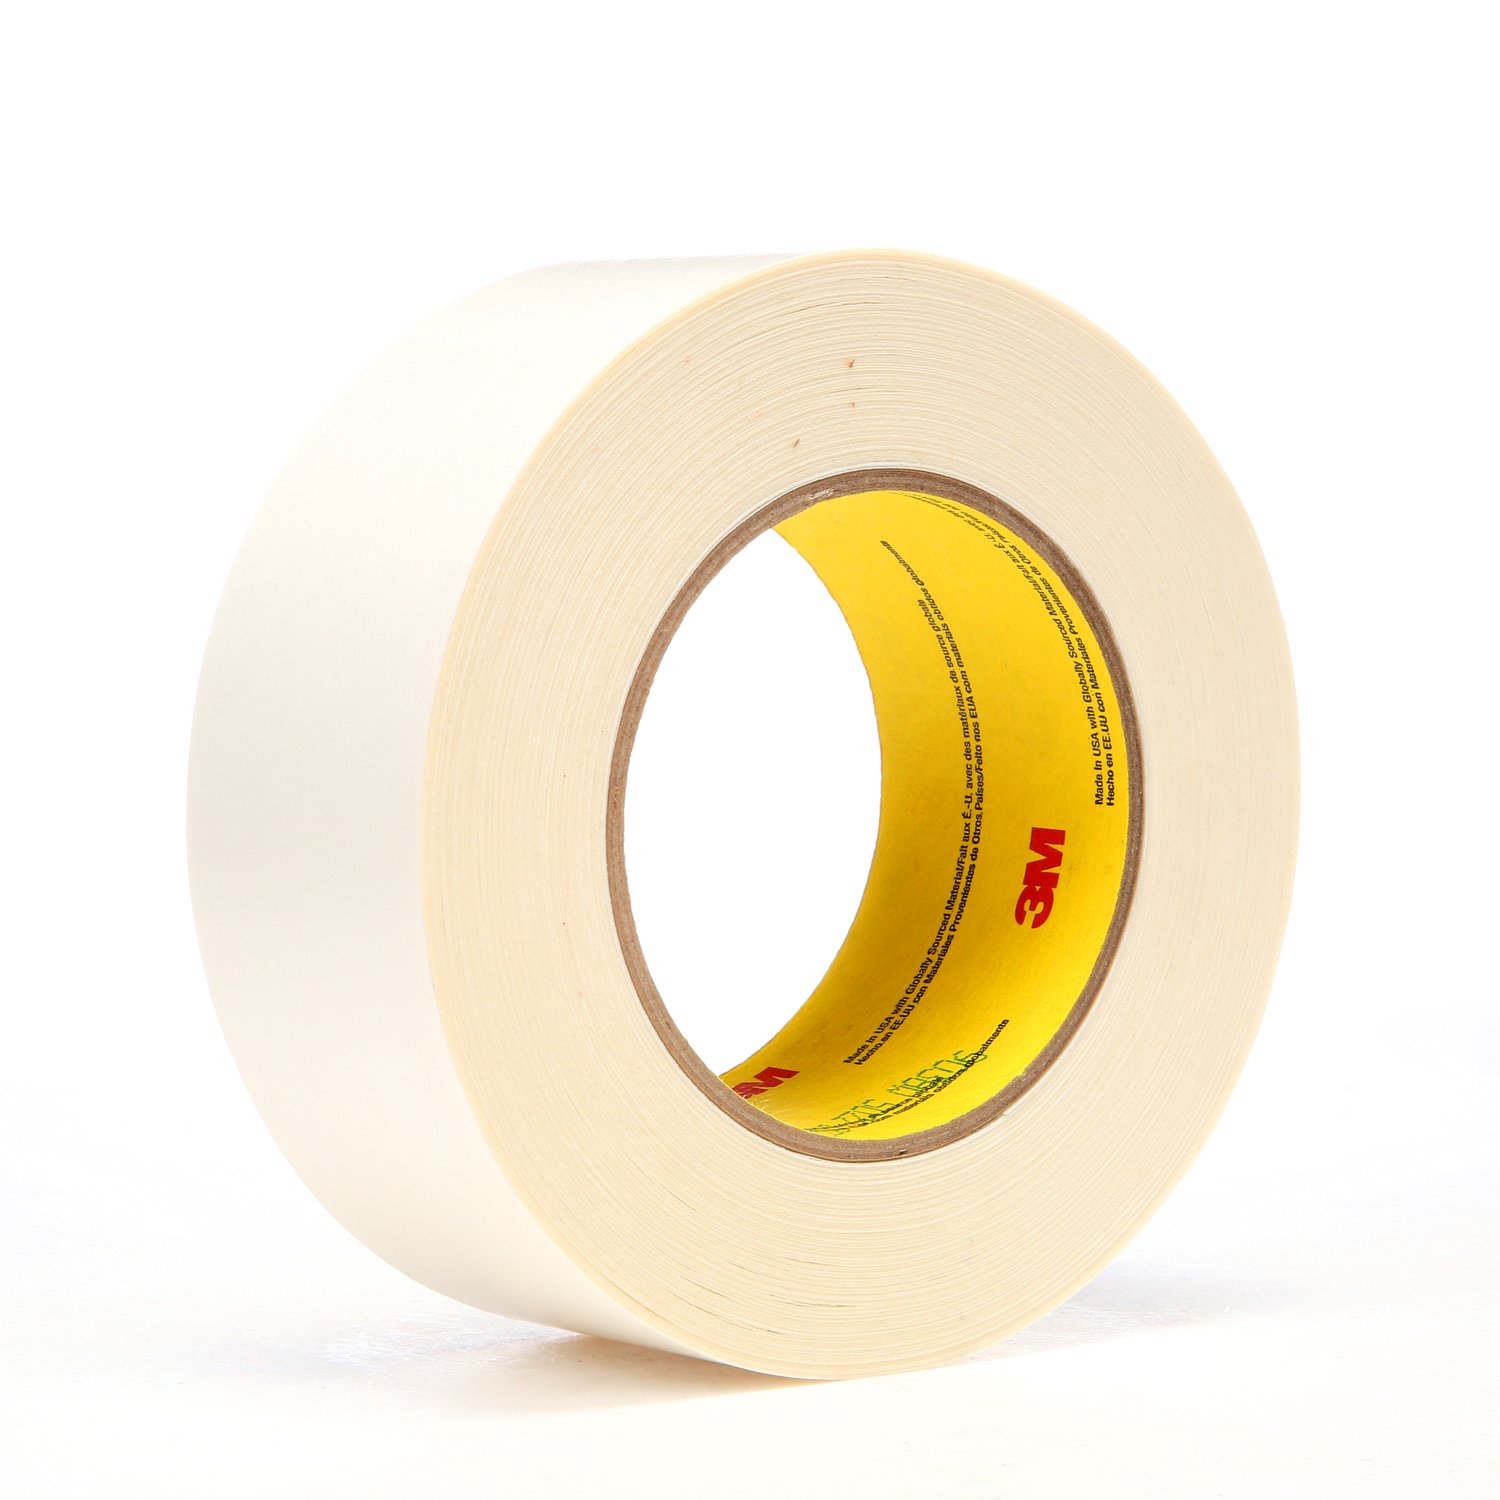 7100028065 - 3M Repulpable Double Coated Splicing Tape 9038W, White, 48 mm x 33 m, 3
mil, 24 rolls per case